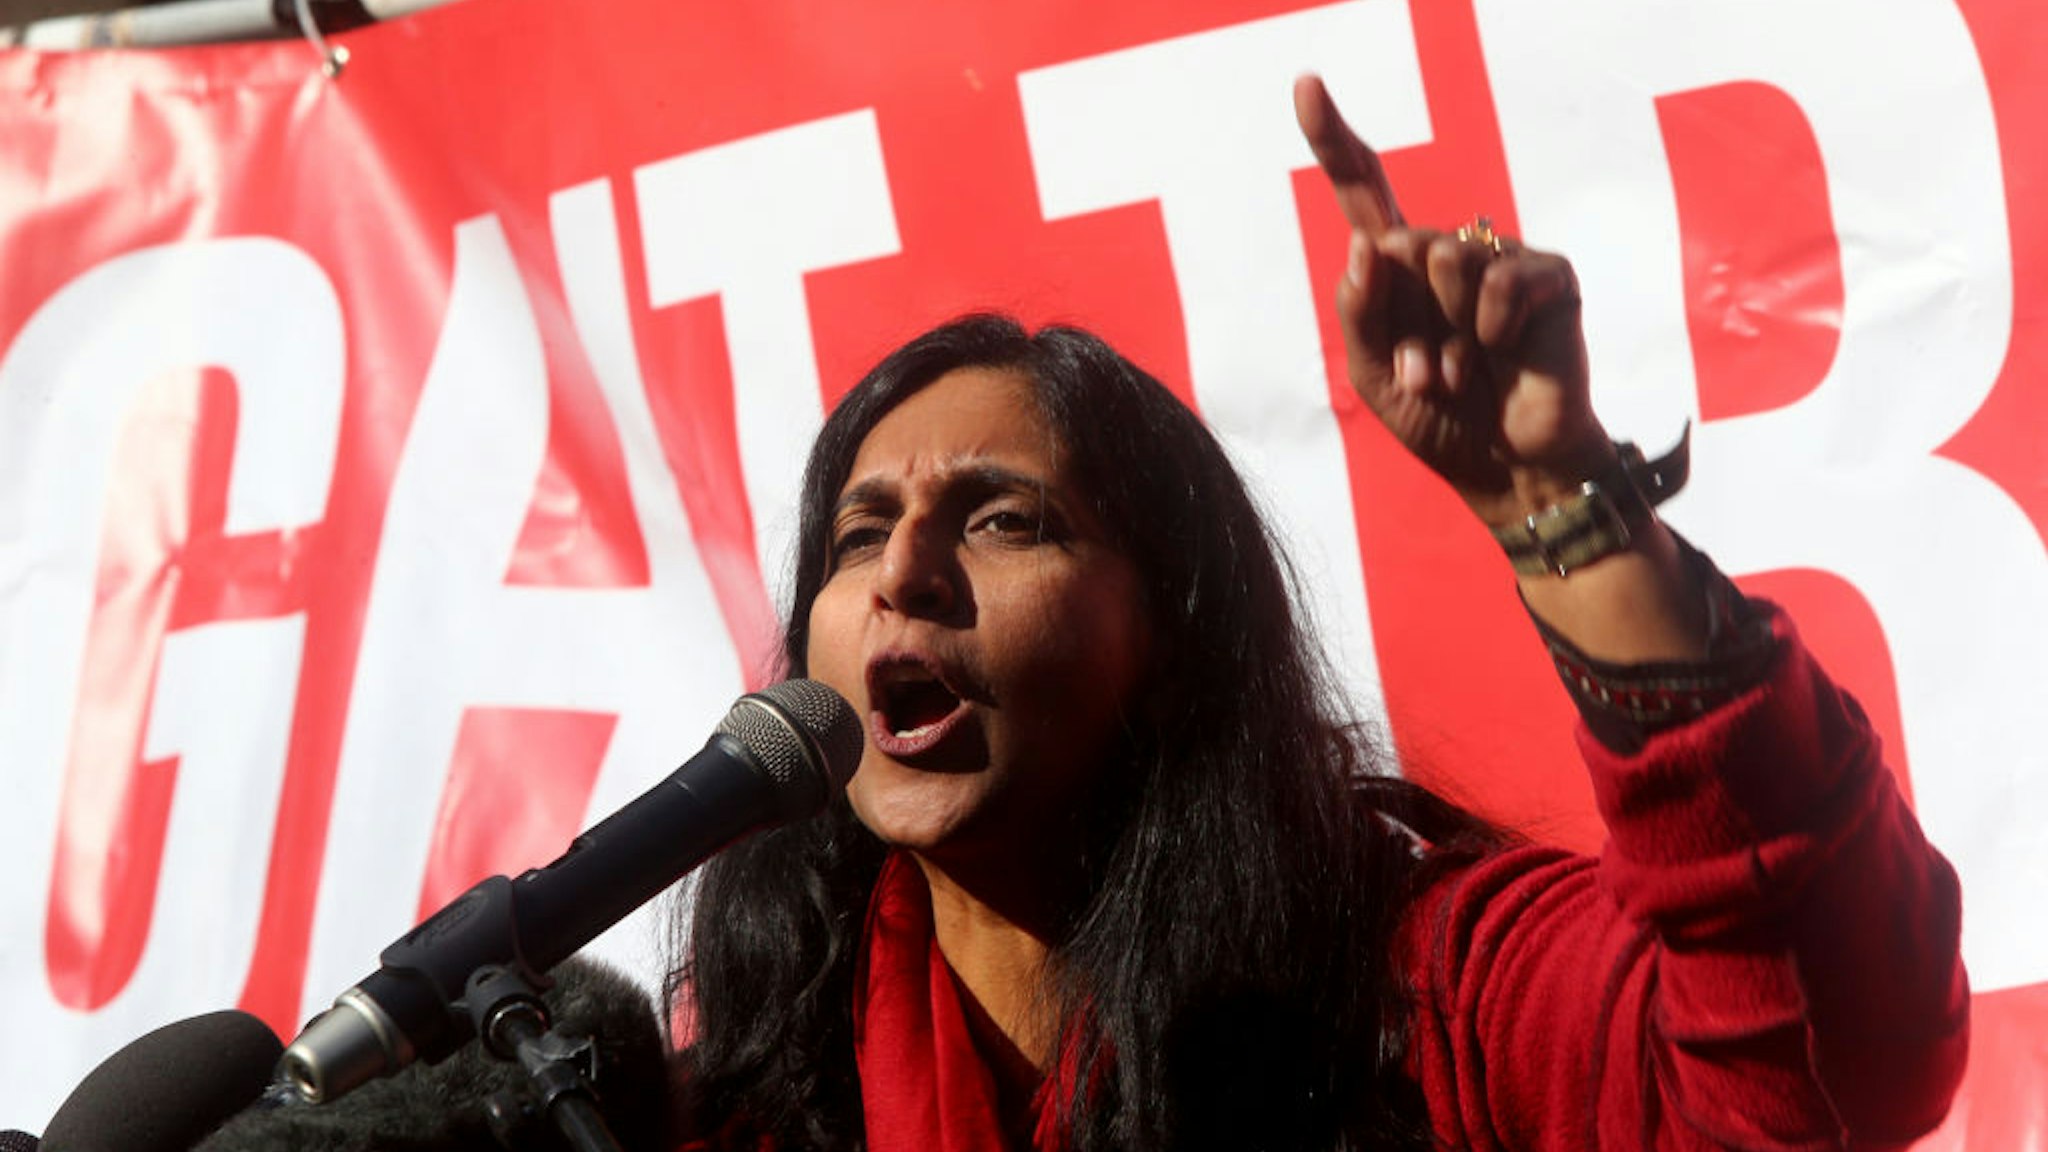 Seattle City Council member Kshama Sawant speaks at a rally held outside the courthouse where U.S. District Court for the Western District of Washington at Seattle is hearing Daniel Ramirez Medina v. U.S. Department of Homeland Security on February 17, 2017 in Seattle, Washington.